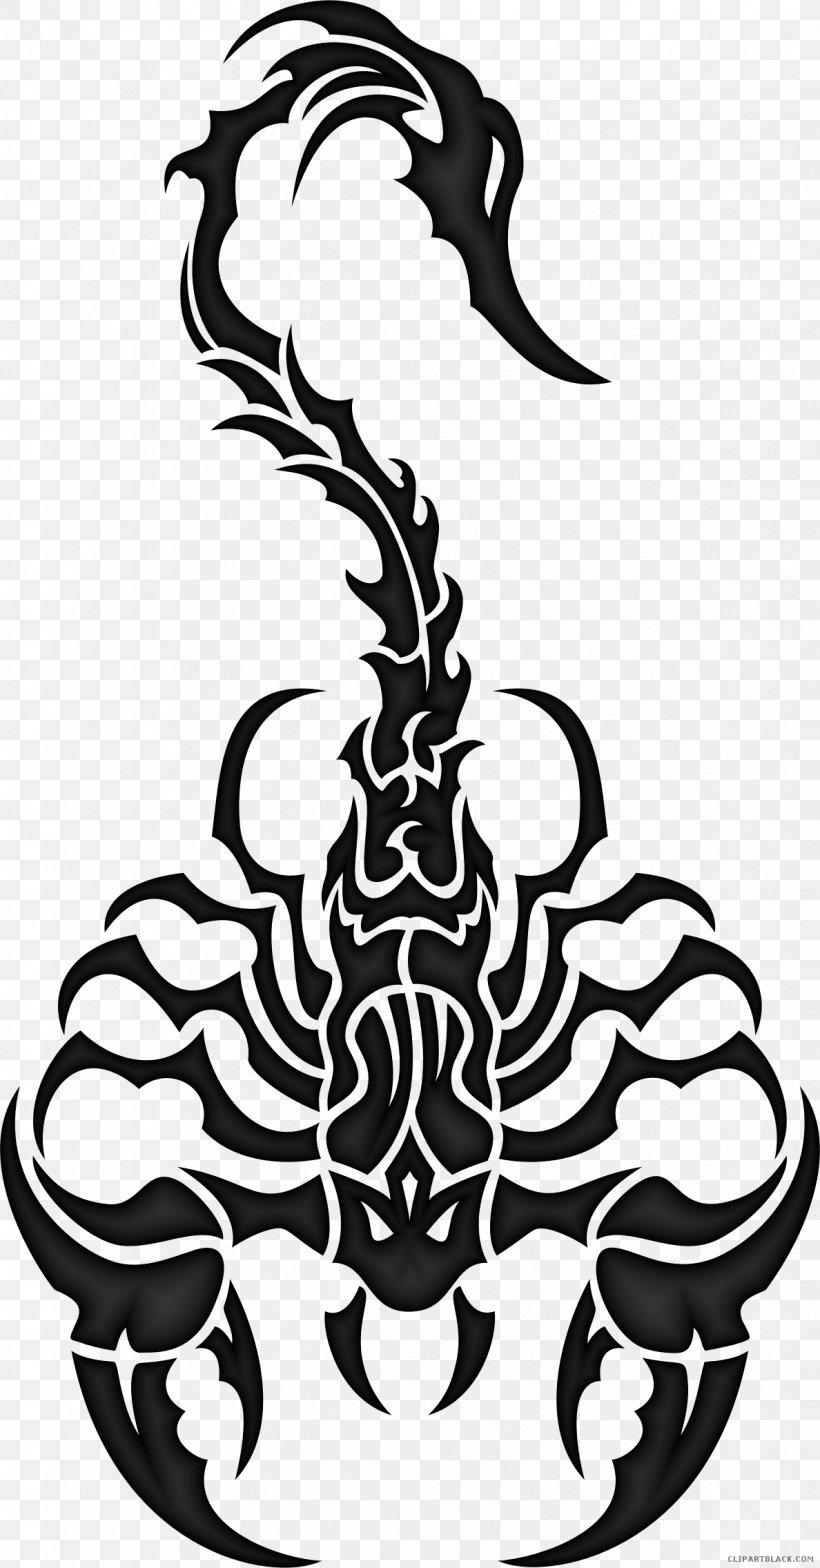 Scorpion Vector Graphics Clip Art Image, PNG, 1188x2272px, Scorpion, Black And White, Drawing, Fictional Character, Invertebrate Download Free